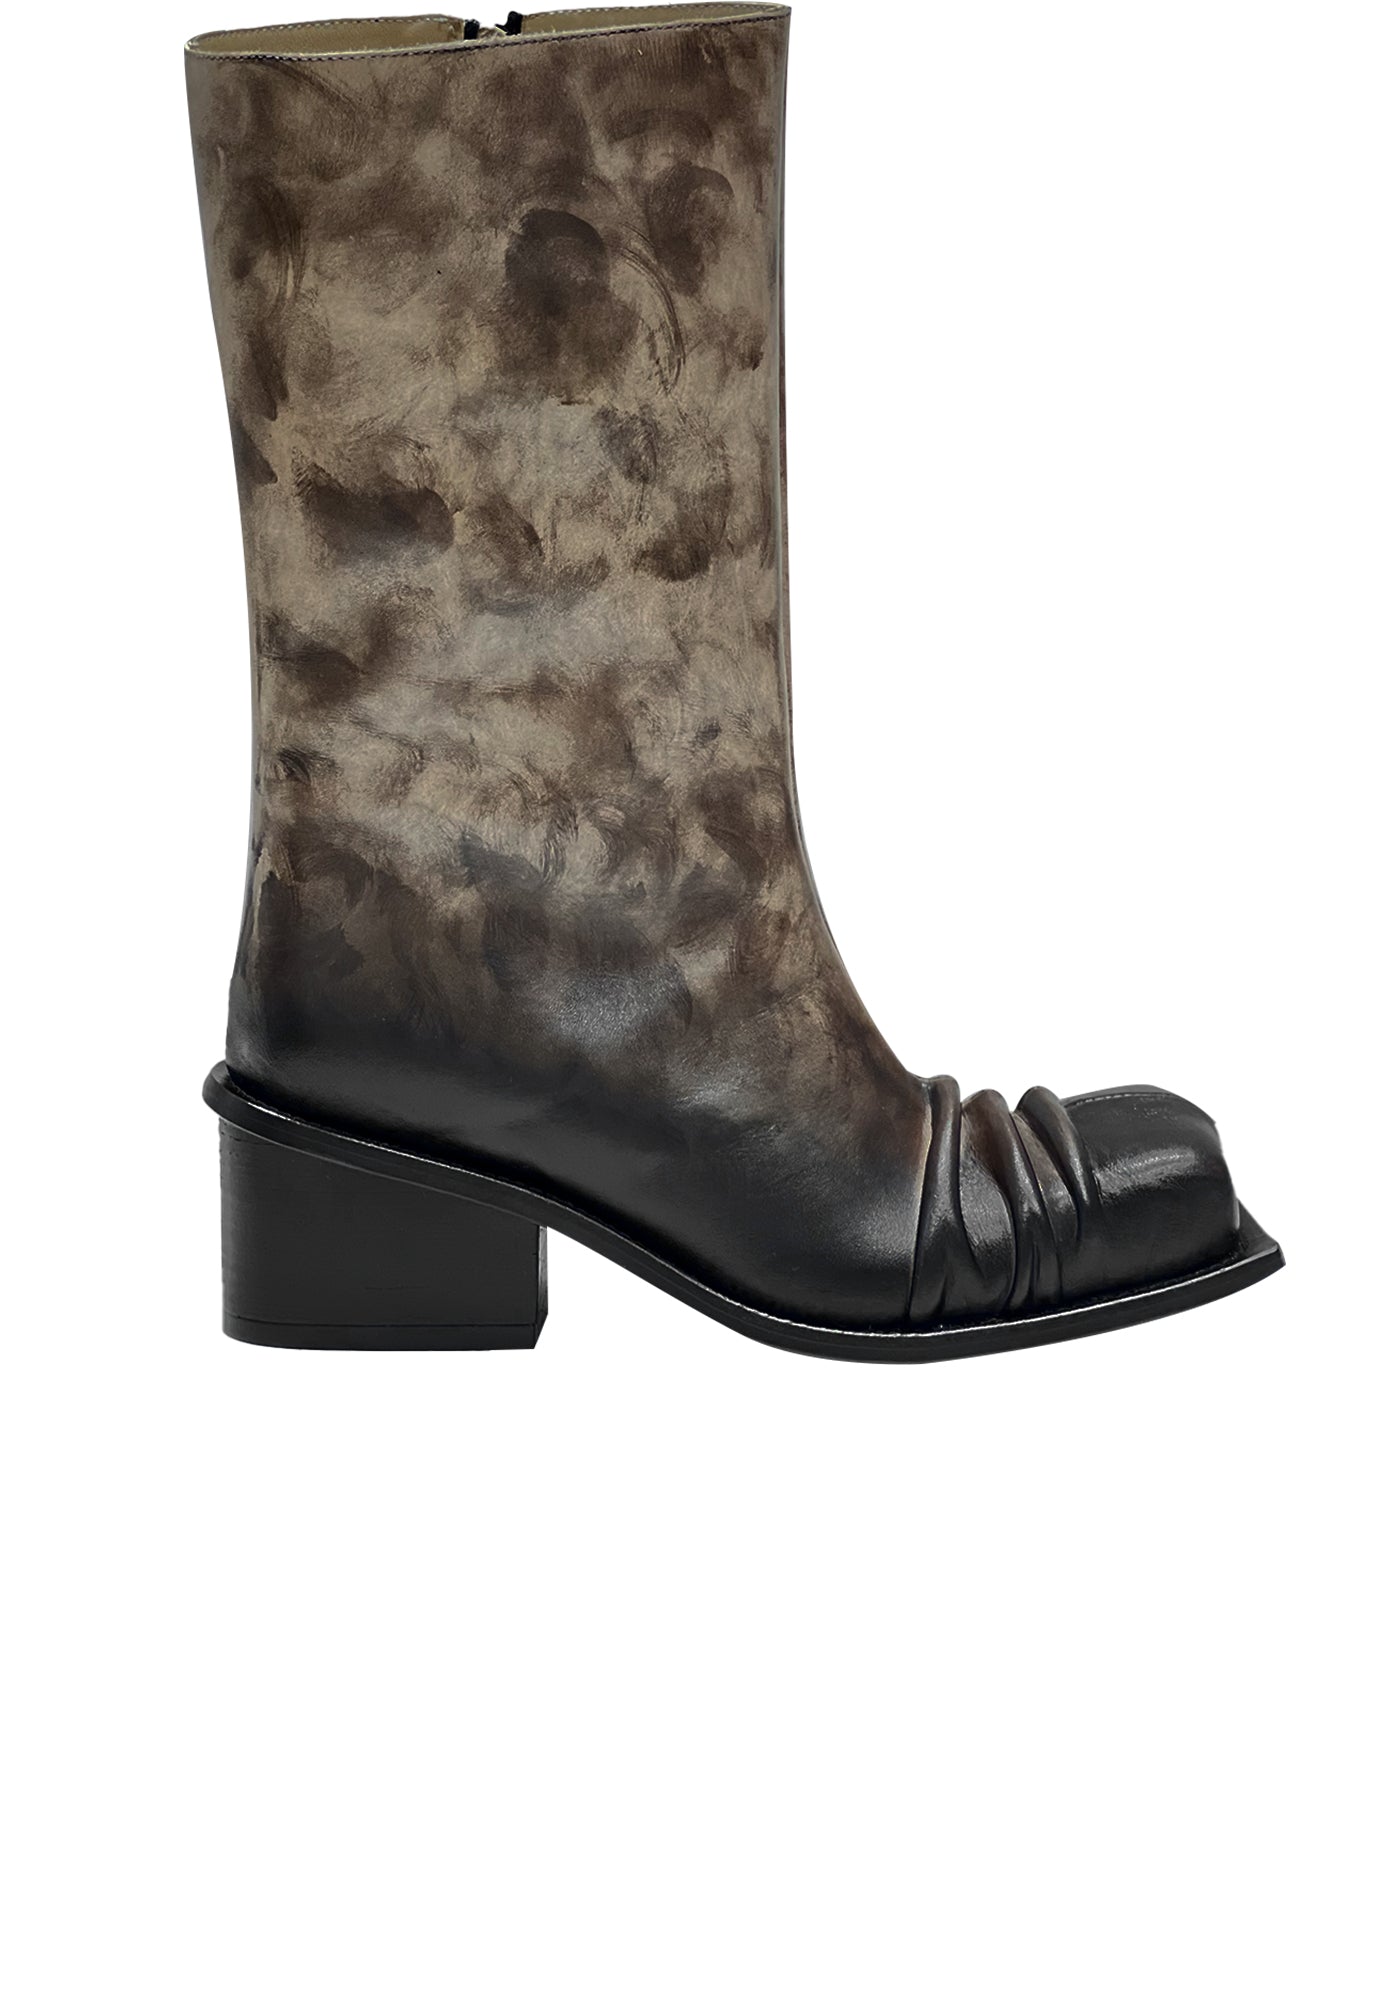 MID-LENGTH SQUARE TOE BOOTS